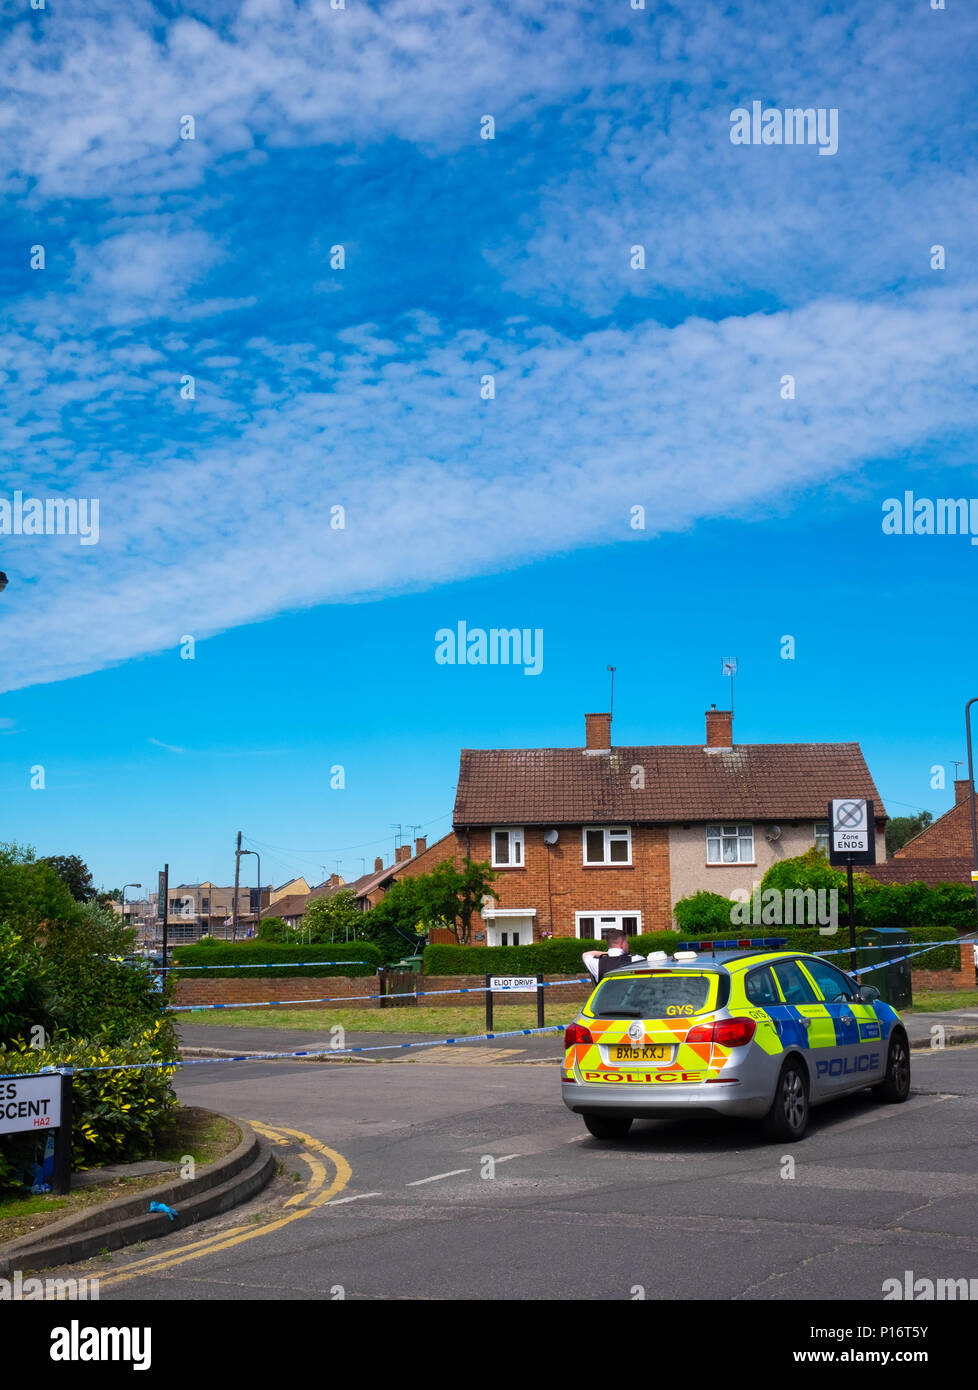 London, England. 11th June 2018. The morning after another teenager is stabbed in London, a forensic officer checks the crime scene for clues within an area cordoned off by the Police. This stabbing happened just a short time after a man was stabbed a few miles away in Northolt. ©Tim Ring/Alamy Live News Stock Photo